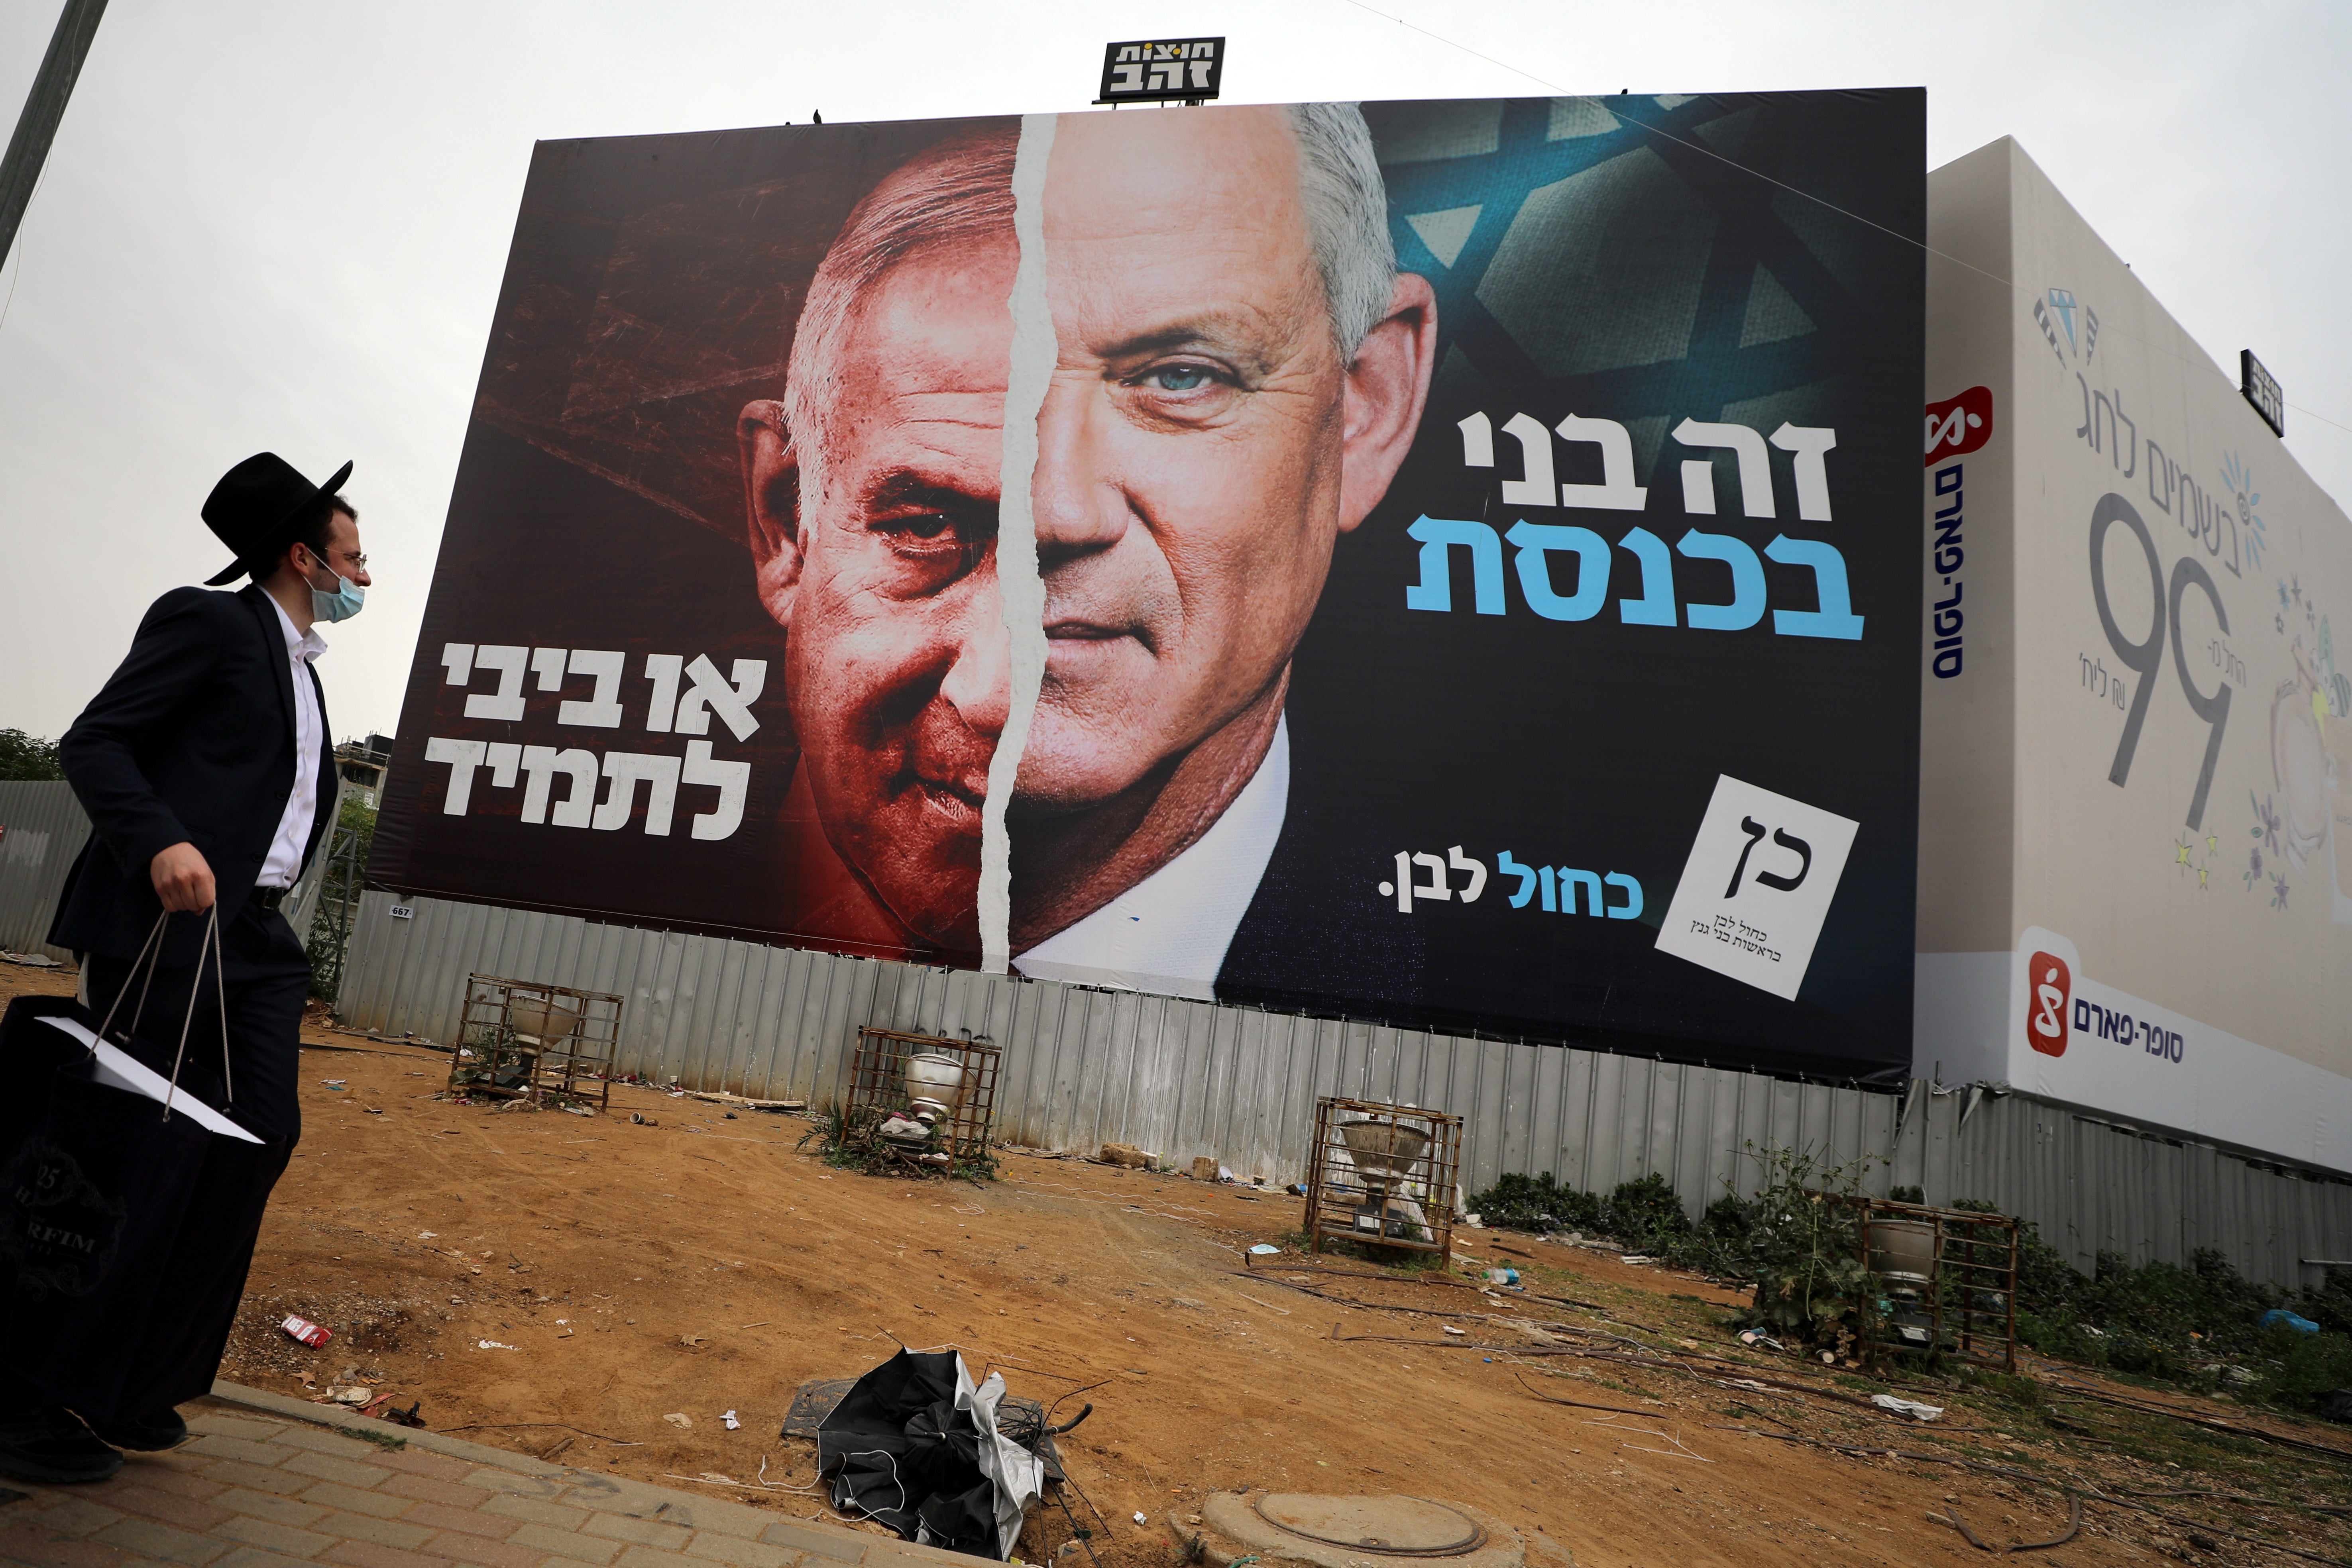 An ultra-Orthodox Jewish man looks at a Blue and White party election campaign poster depicting its leader, Israeli defence minister Benny Gantz, alongside Israeli prime minister Benjamin Netanyahu